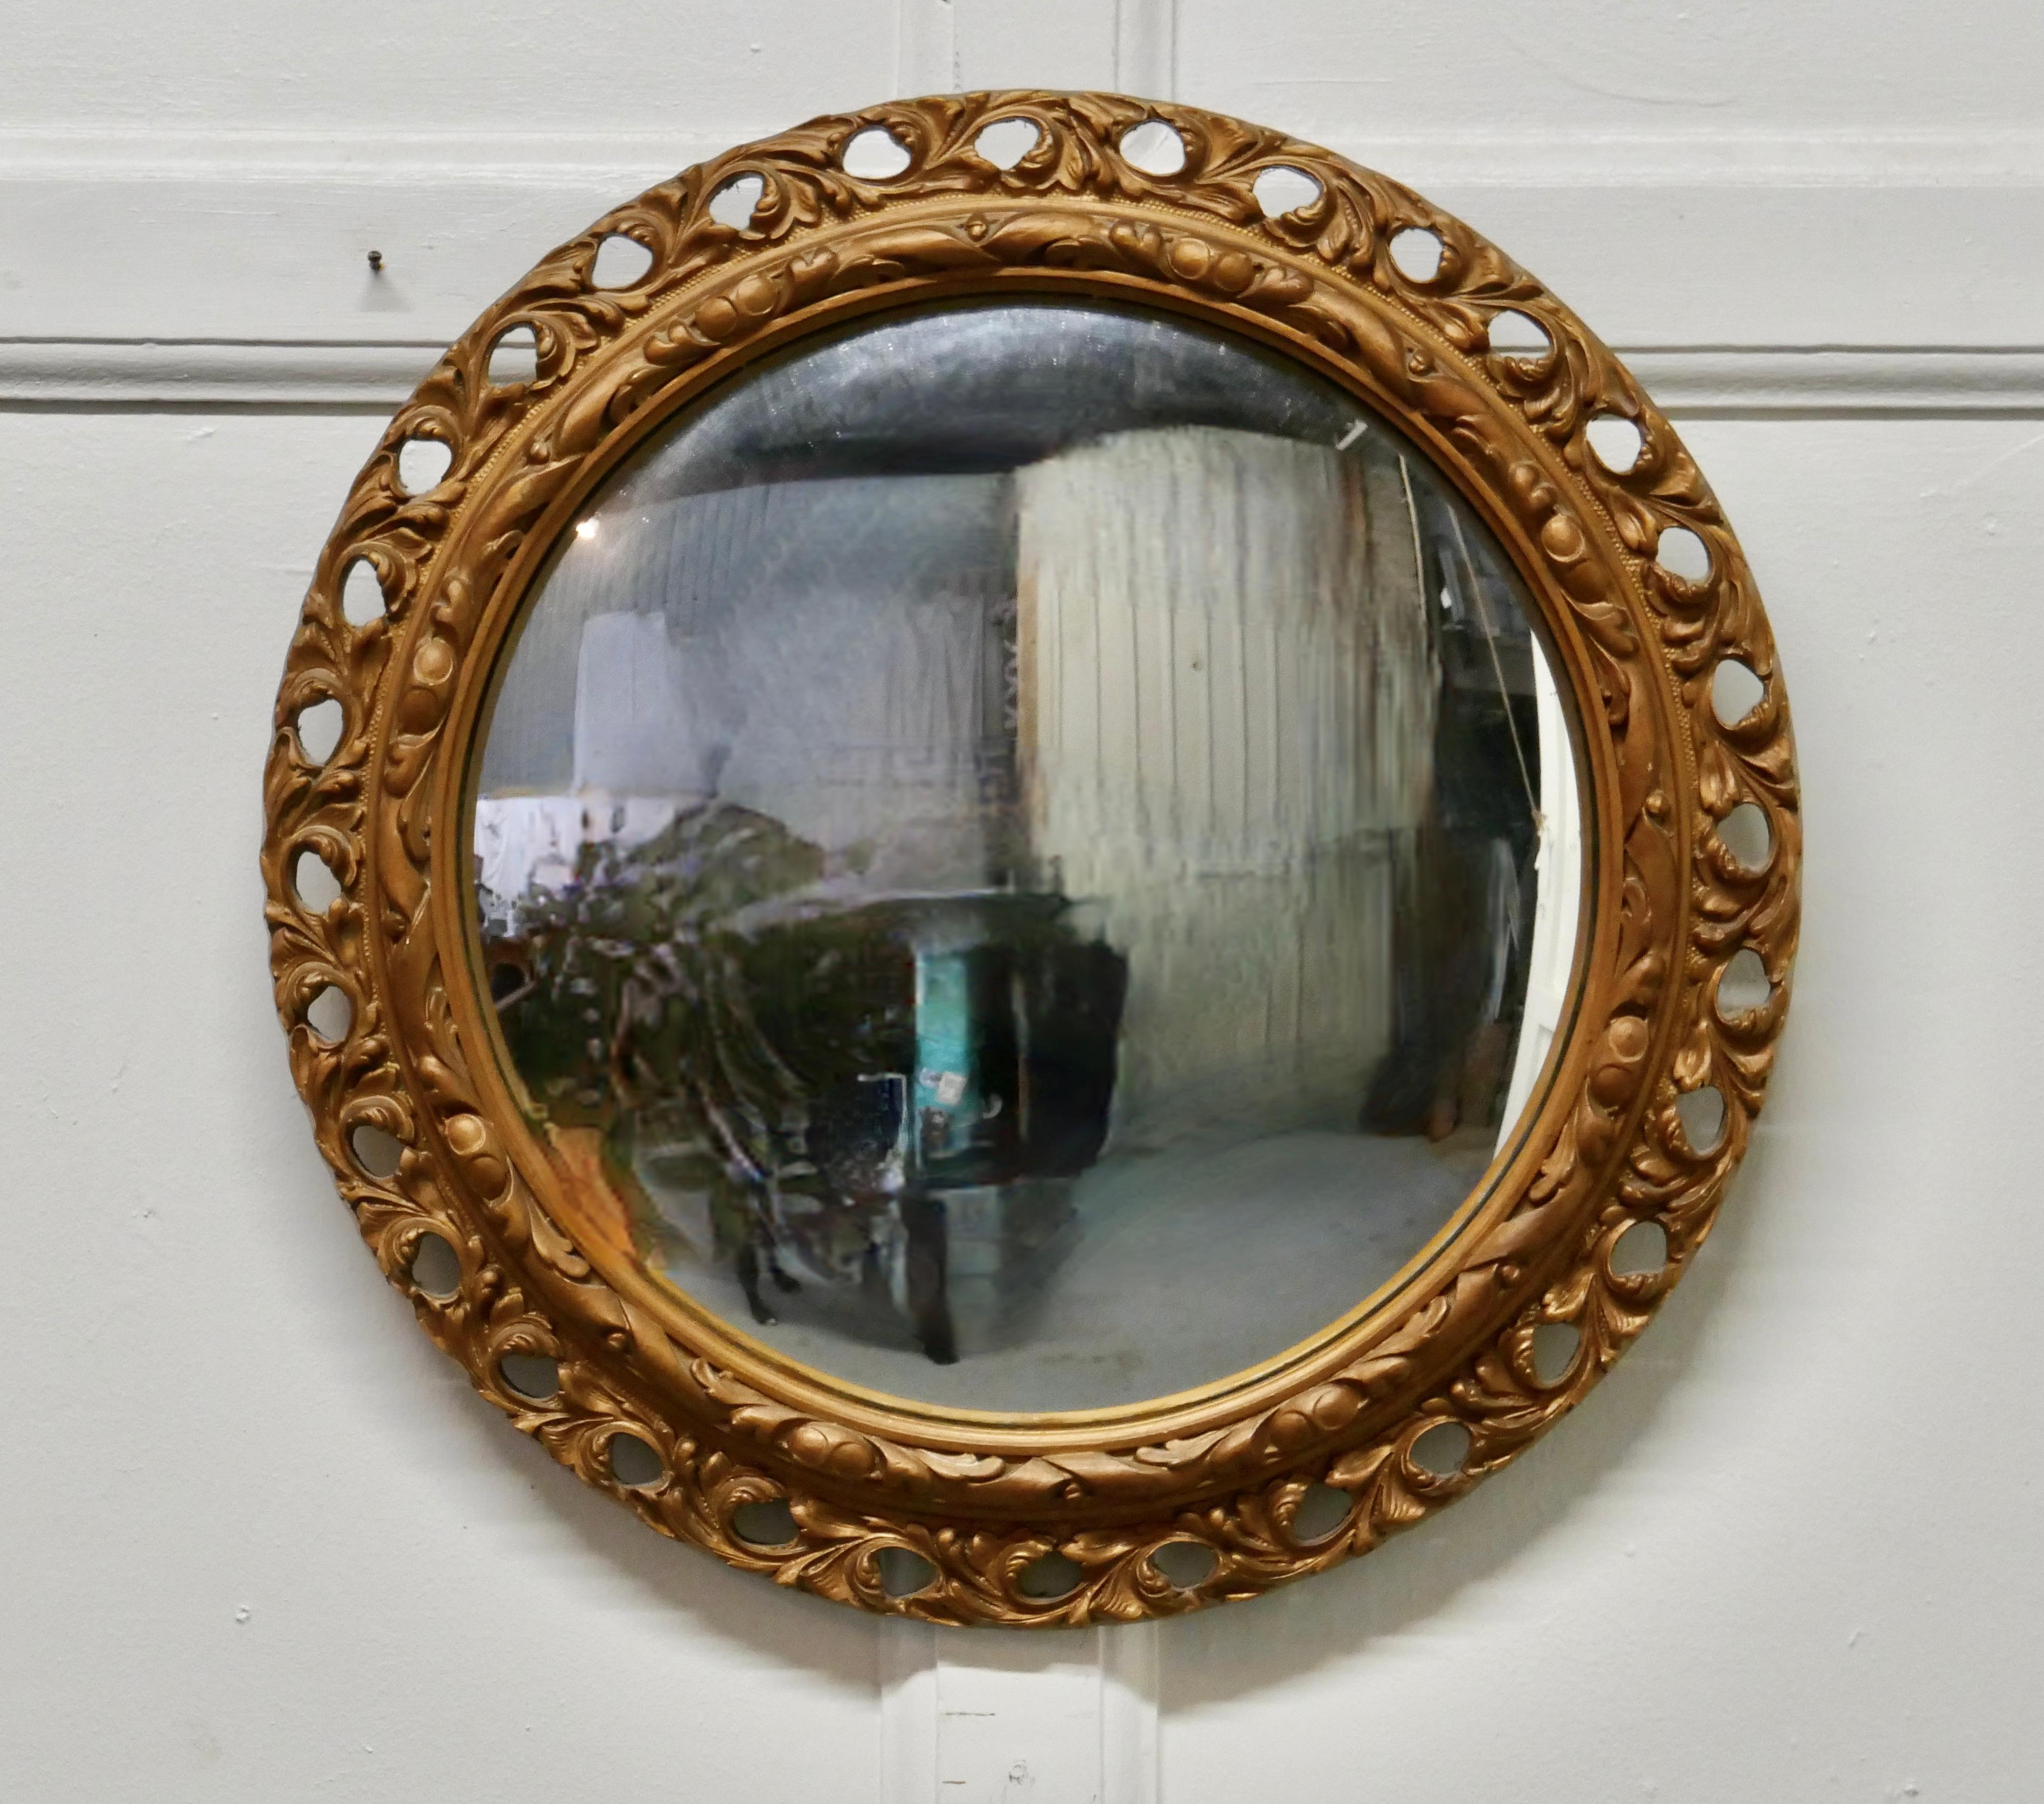 Rococo Revival Carved Convex Gilt Wall Mirror For Sale